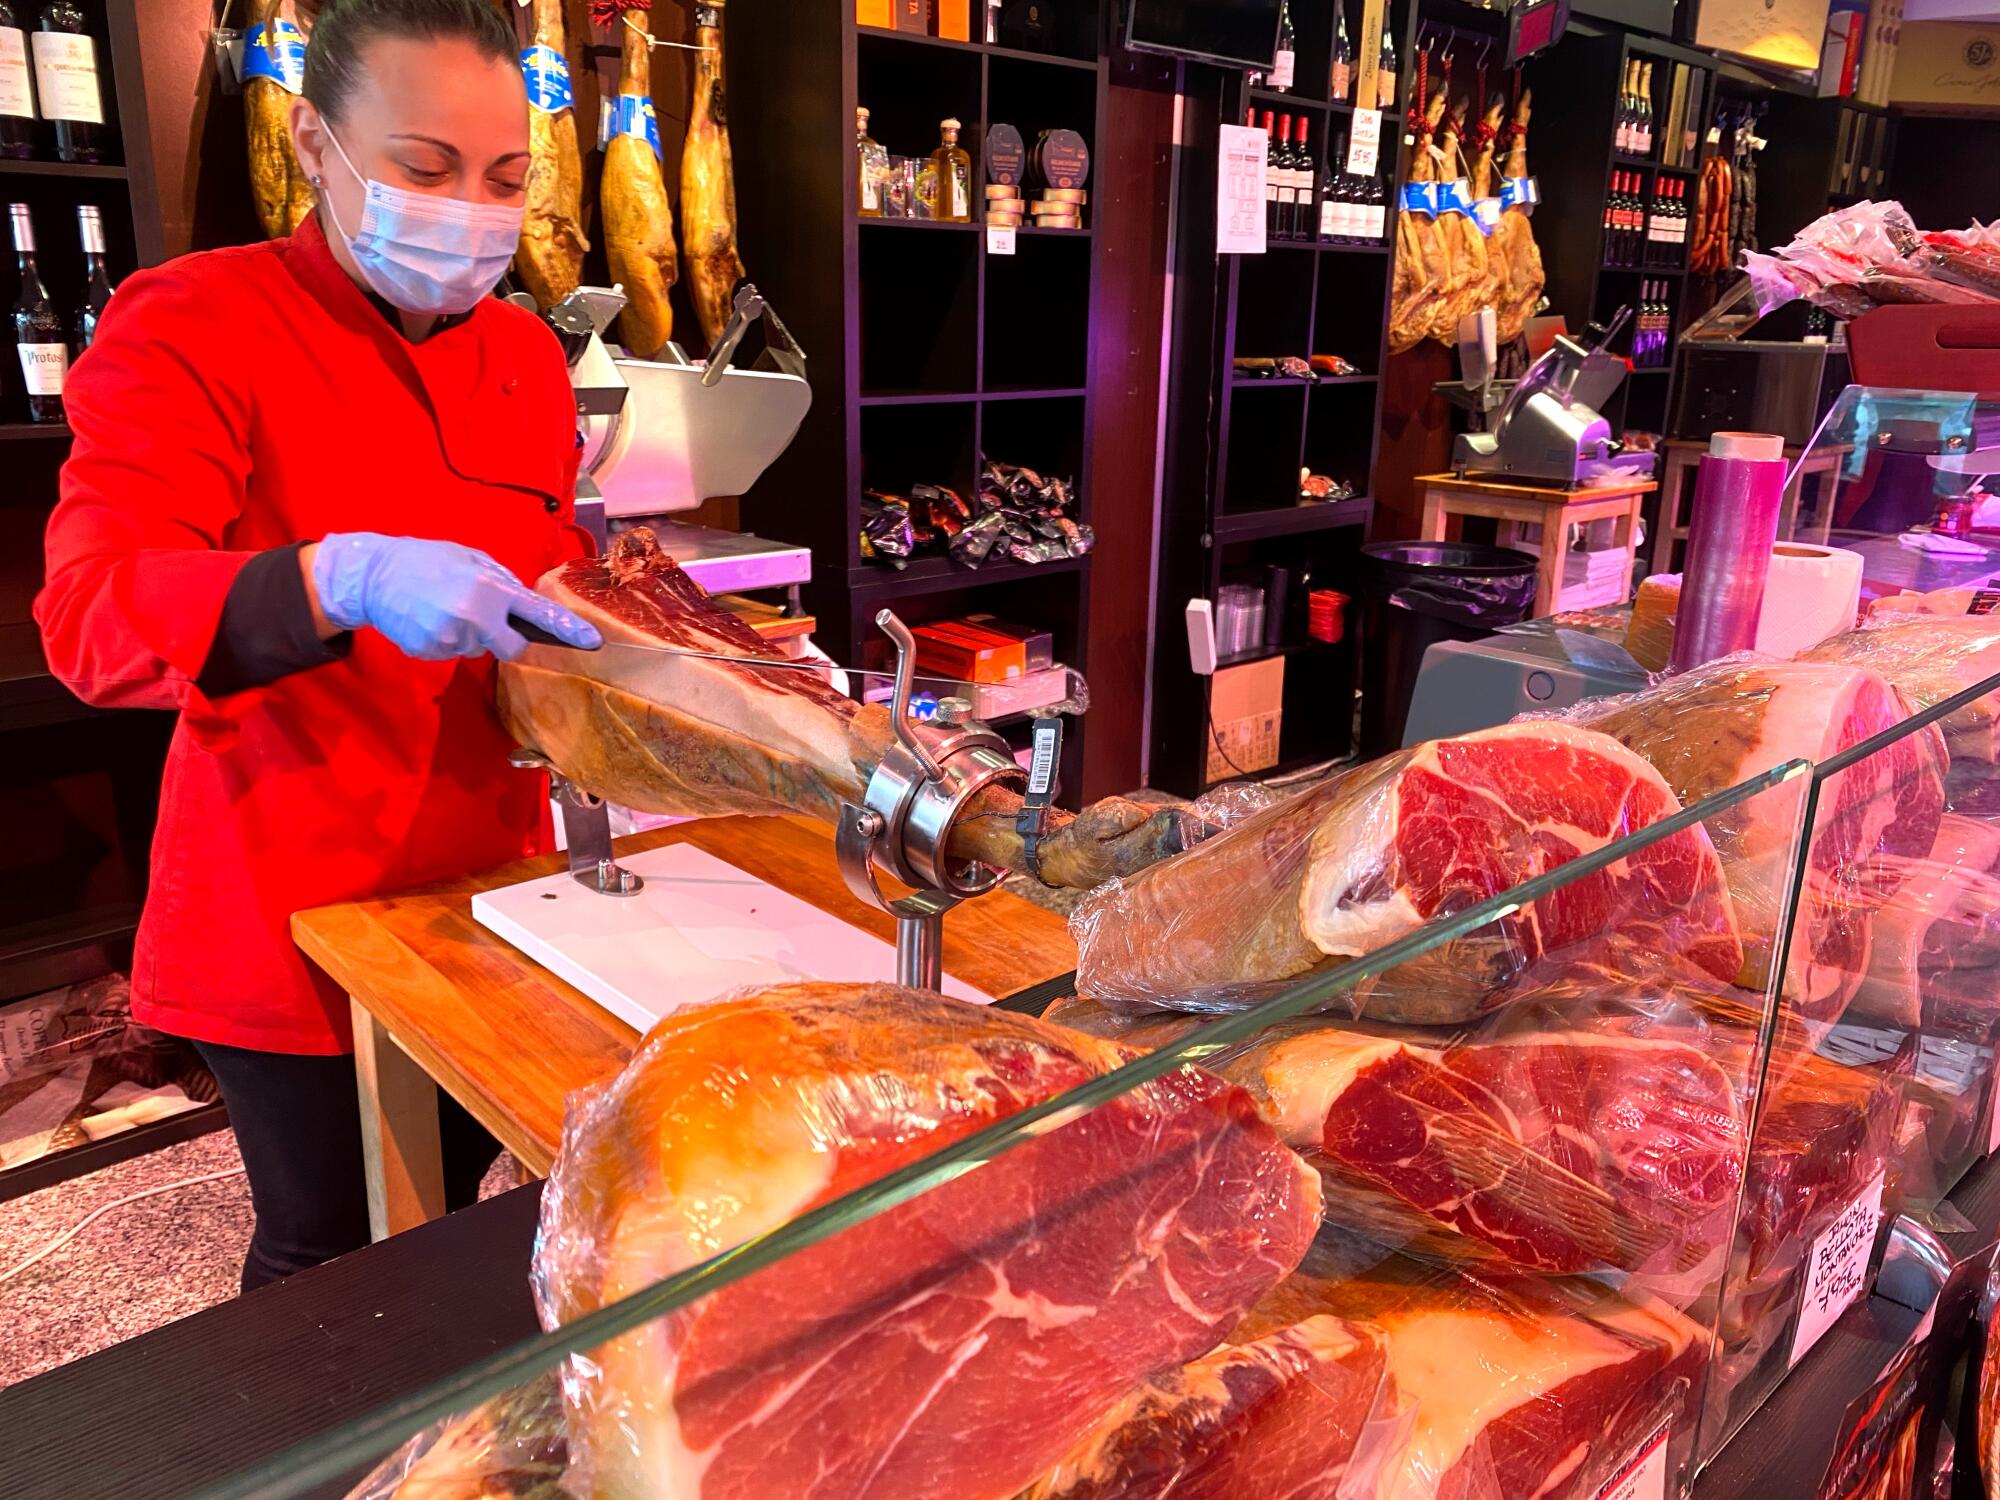 Iberian hams that were previously displayed outdoors are now shown behind display cabinets as an additional post-pandemic hygiene measure in Gijon, Spain.